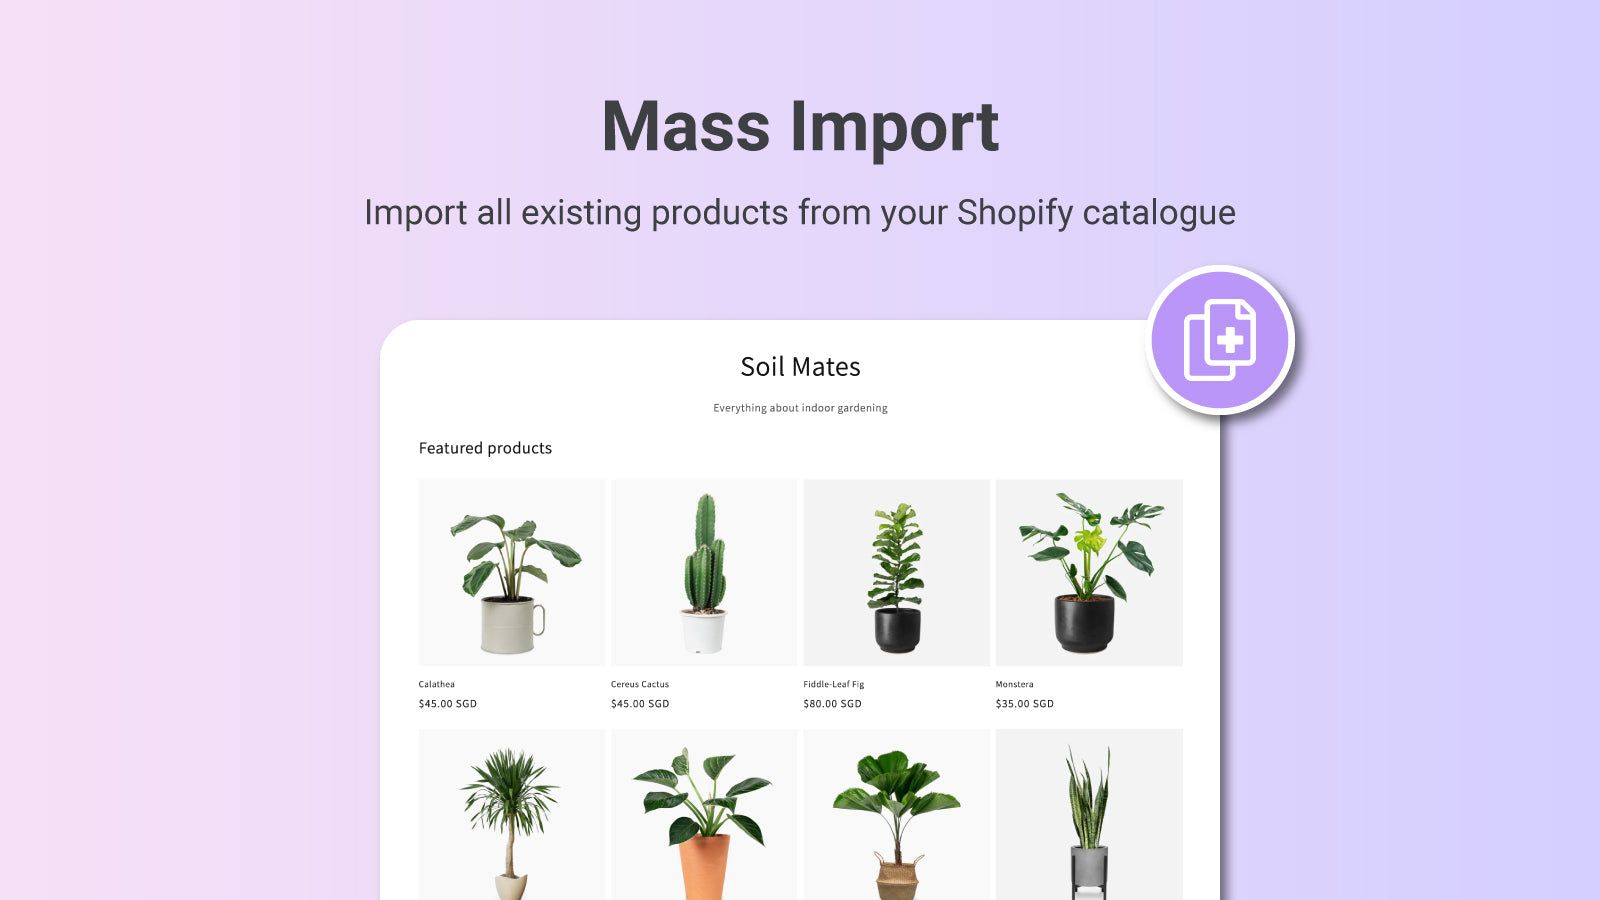 Manual import of single products